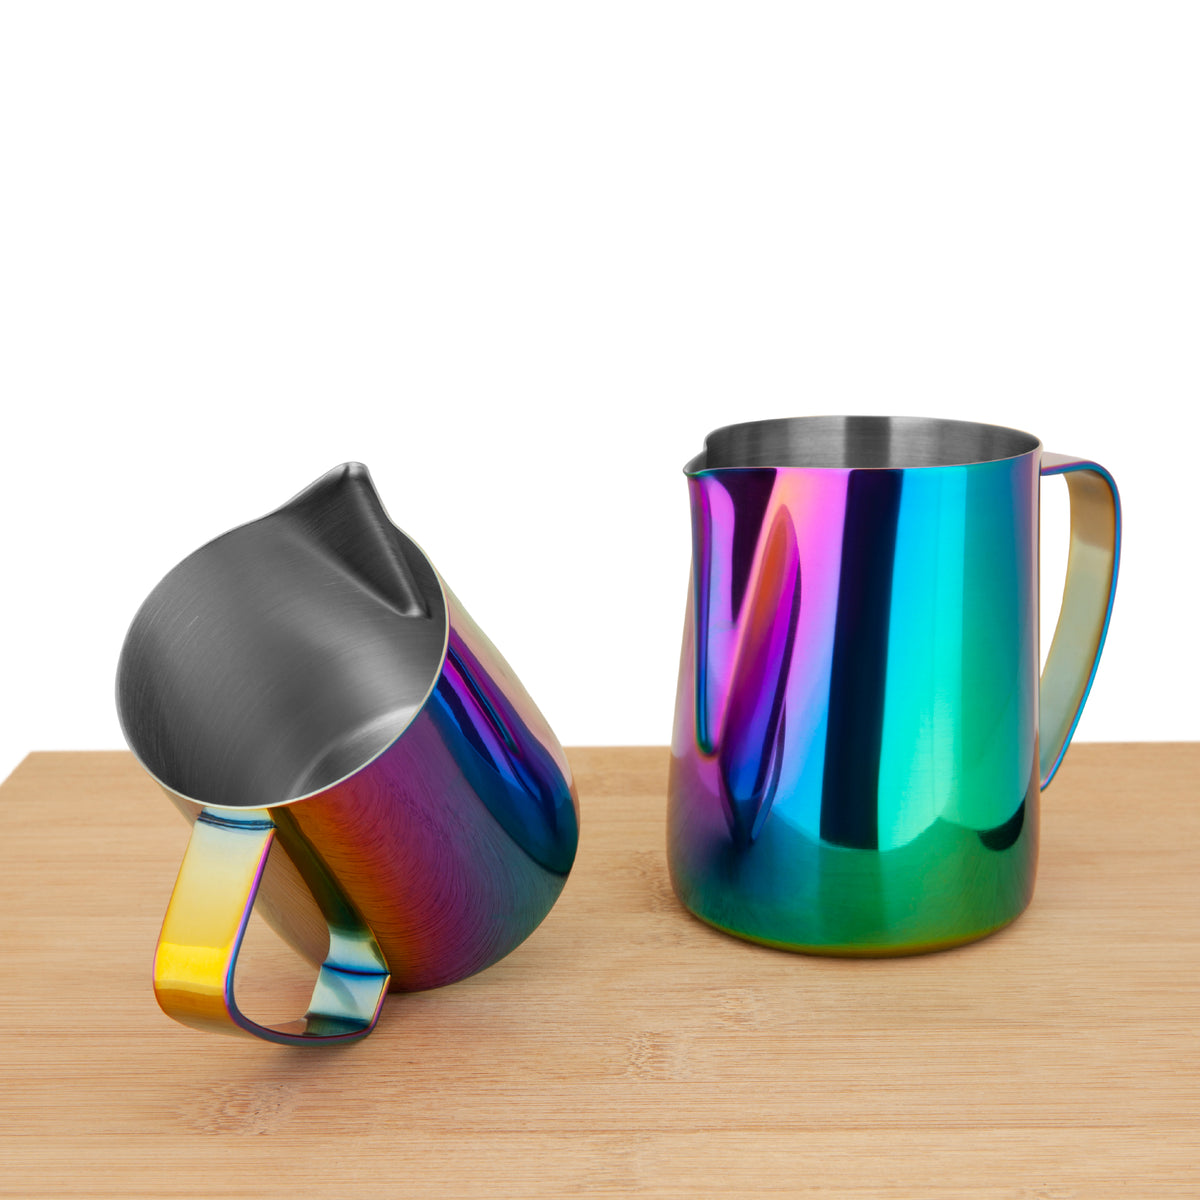 Rainbow Stainless Steel Milk Frothing Pitcher, 12oz